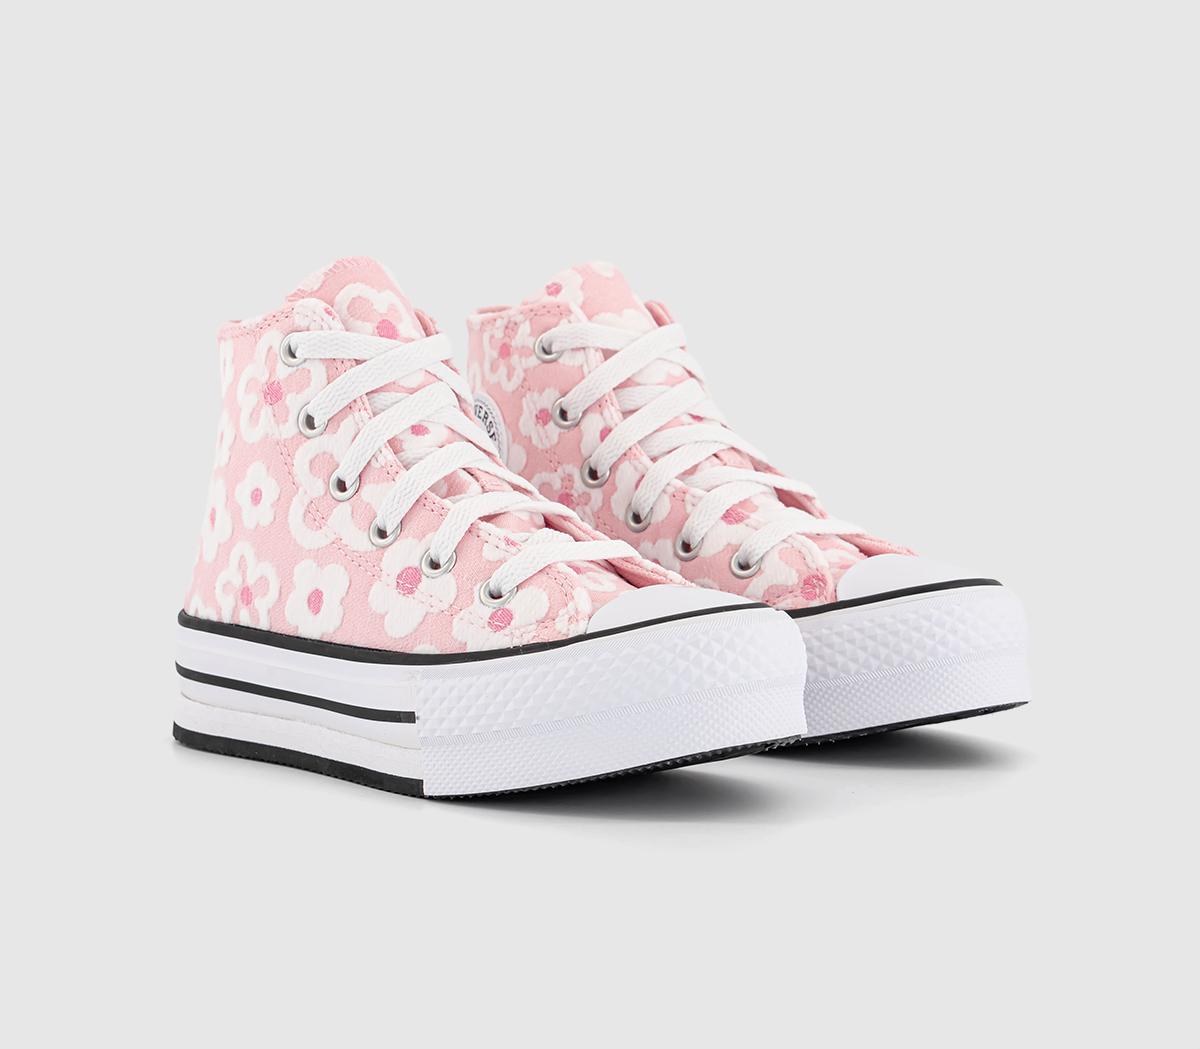 Converse Kids All Star Eva Lift Hi Trainers Donut Glaze Oops Pink White, 11 Youth